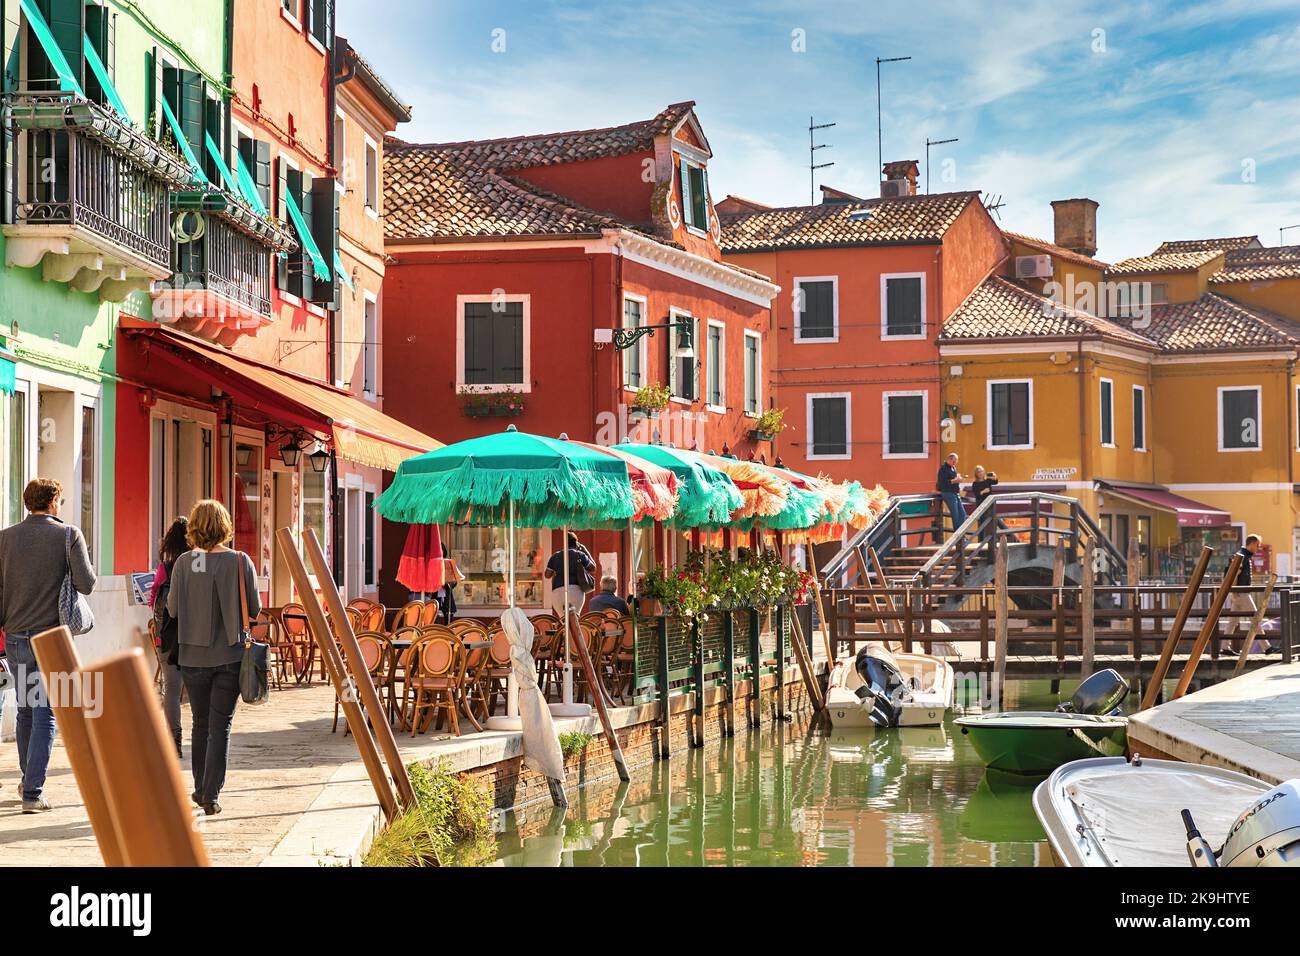 The colorful buildings, bridges, canal, umbrellas, boats on Burano Island in Venice, Italy Stock Photo